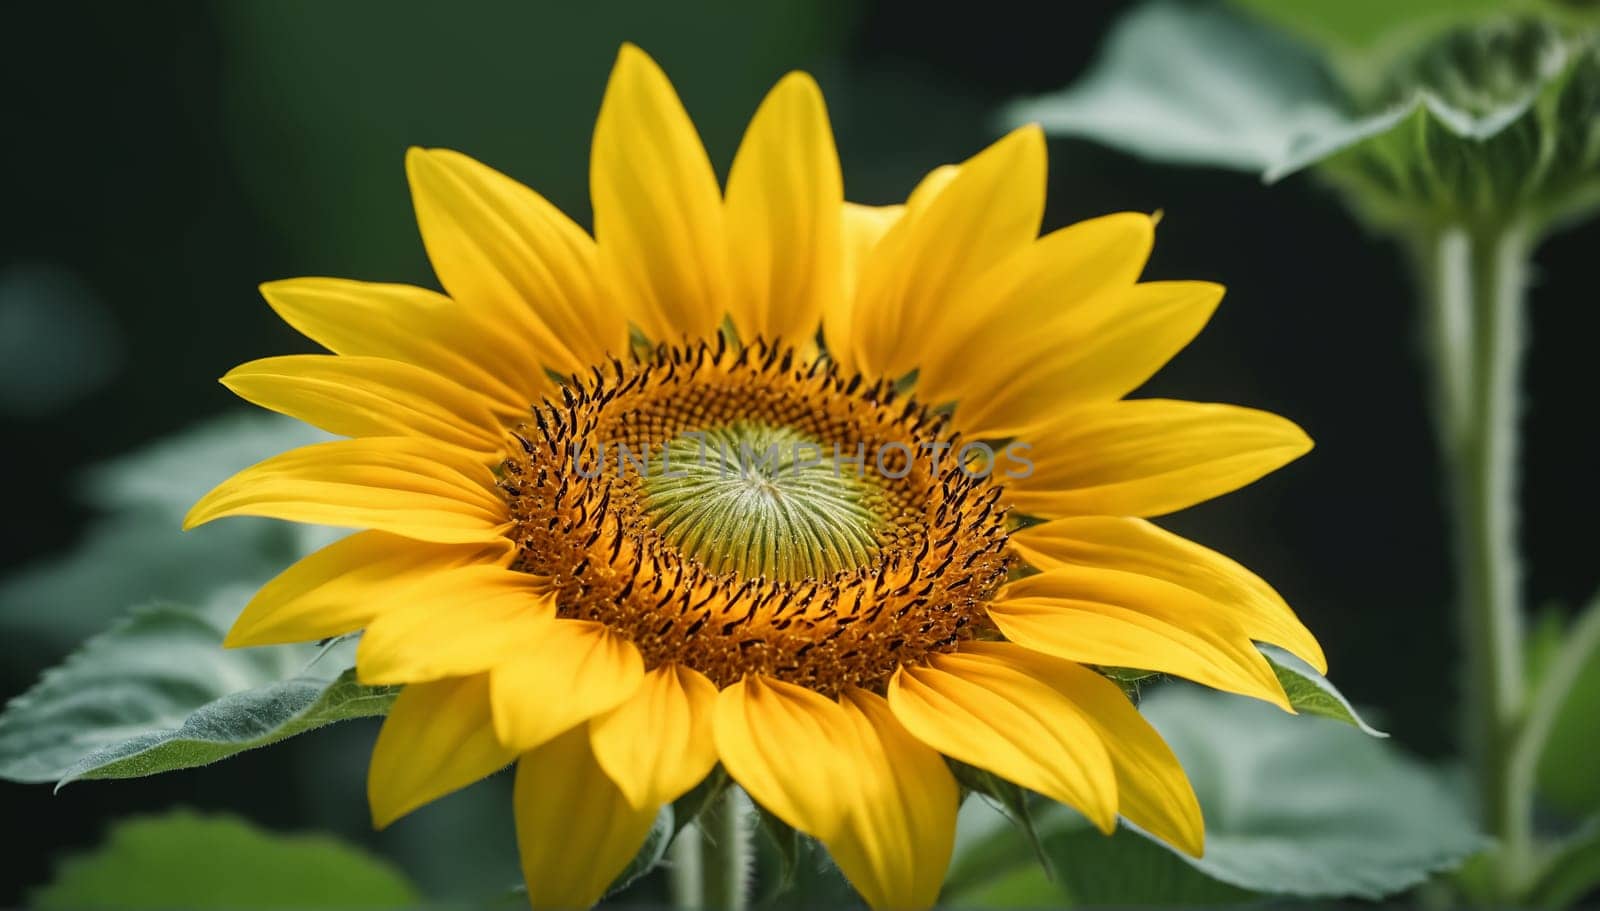 A vibrant collection of Helianthus annuus stands tall, their bright petals and large, seed-filled centers creating a stunning natural exhibit.